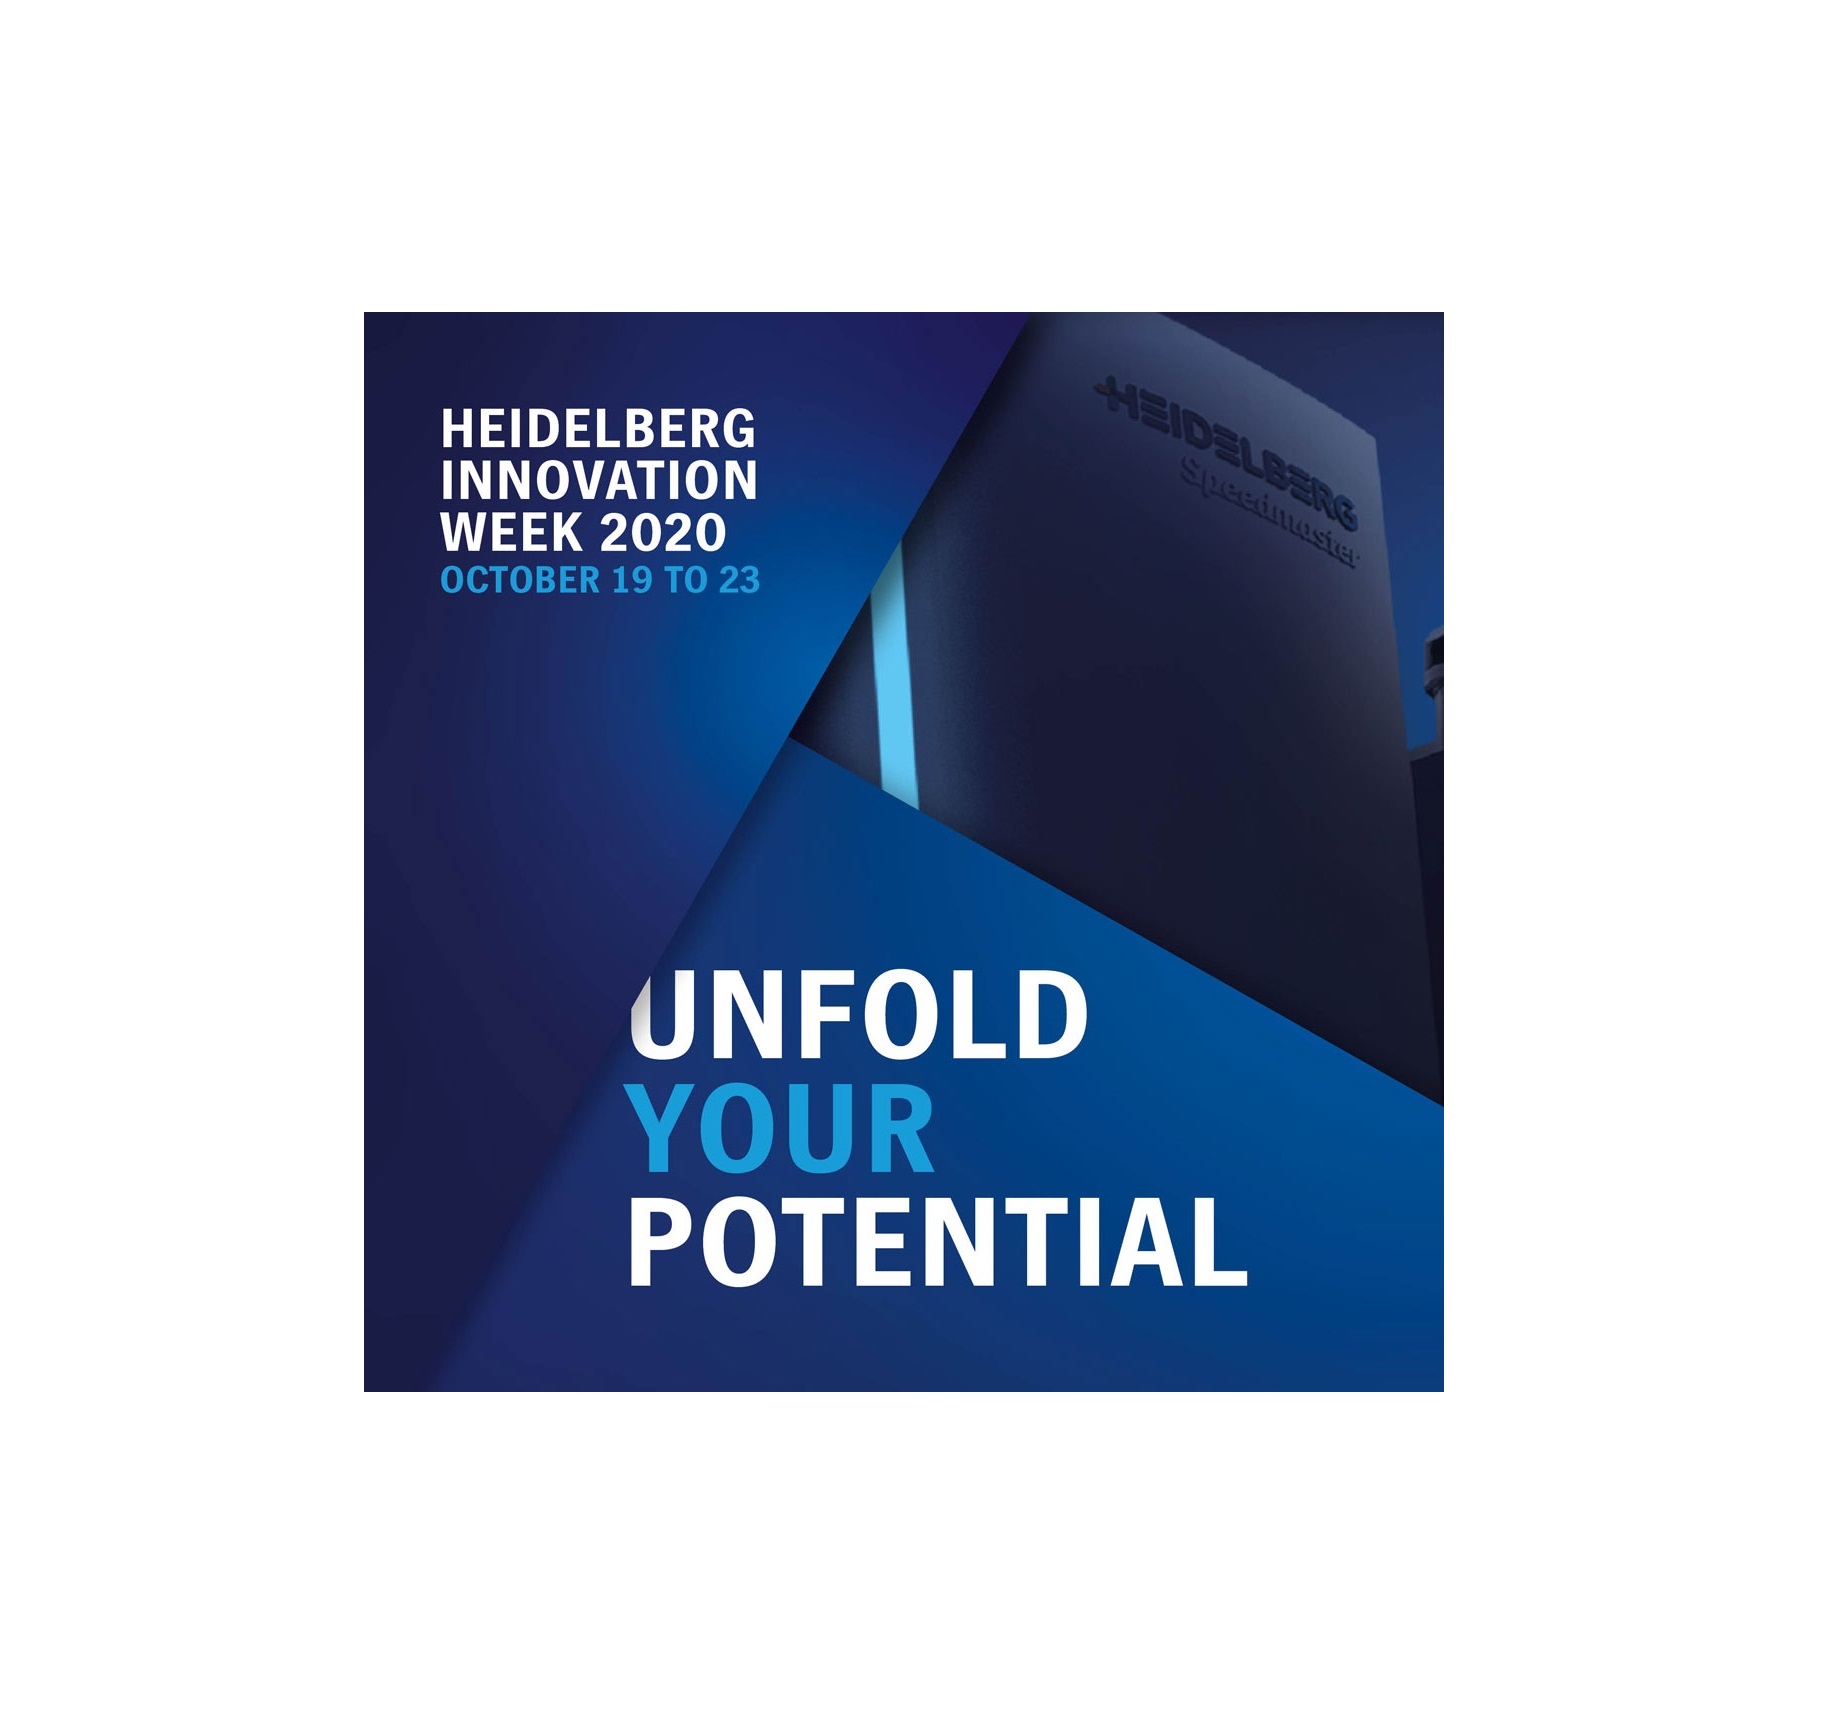 Heidelberg to host first large-scale, virtual “Innovation Week” between 19 and 23 October 2020